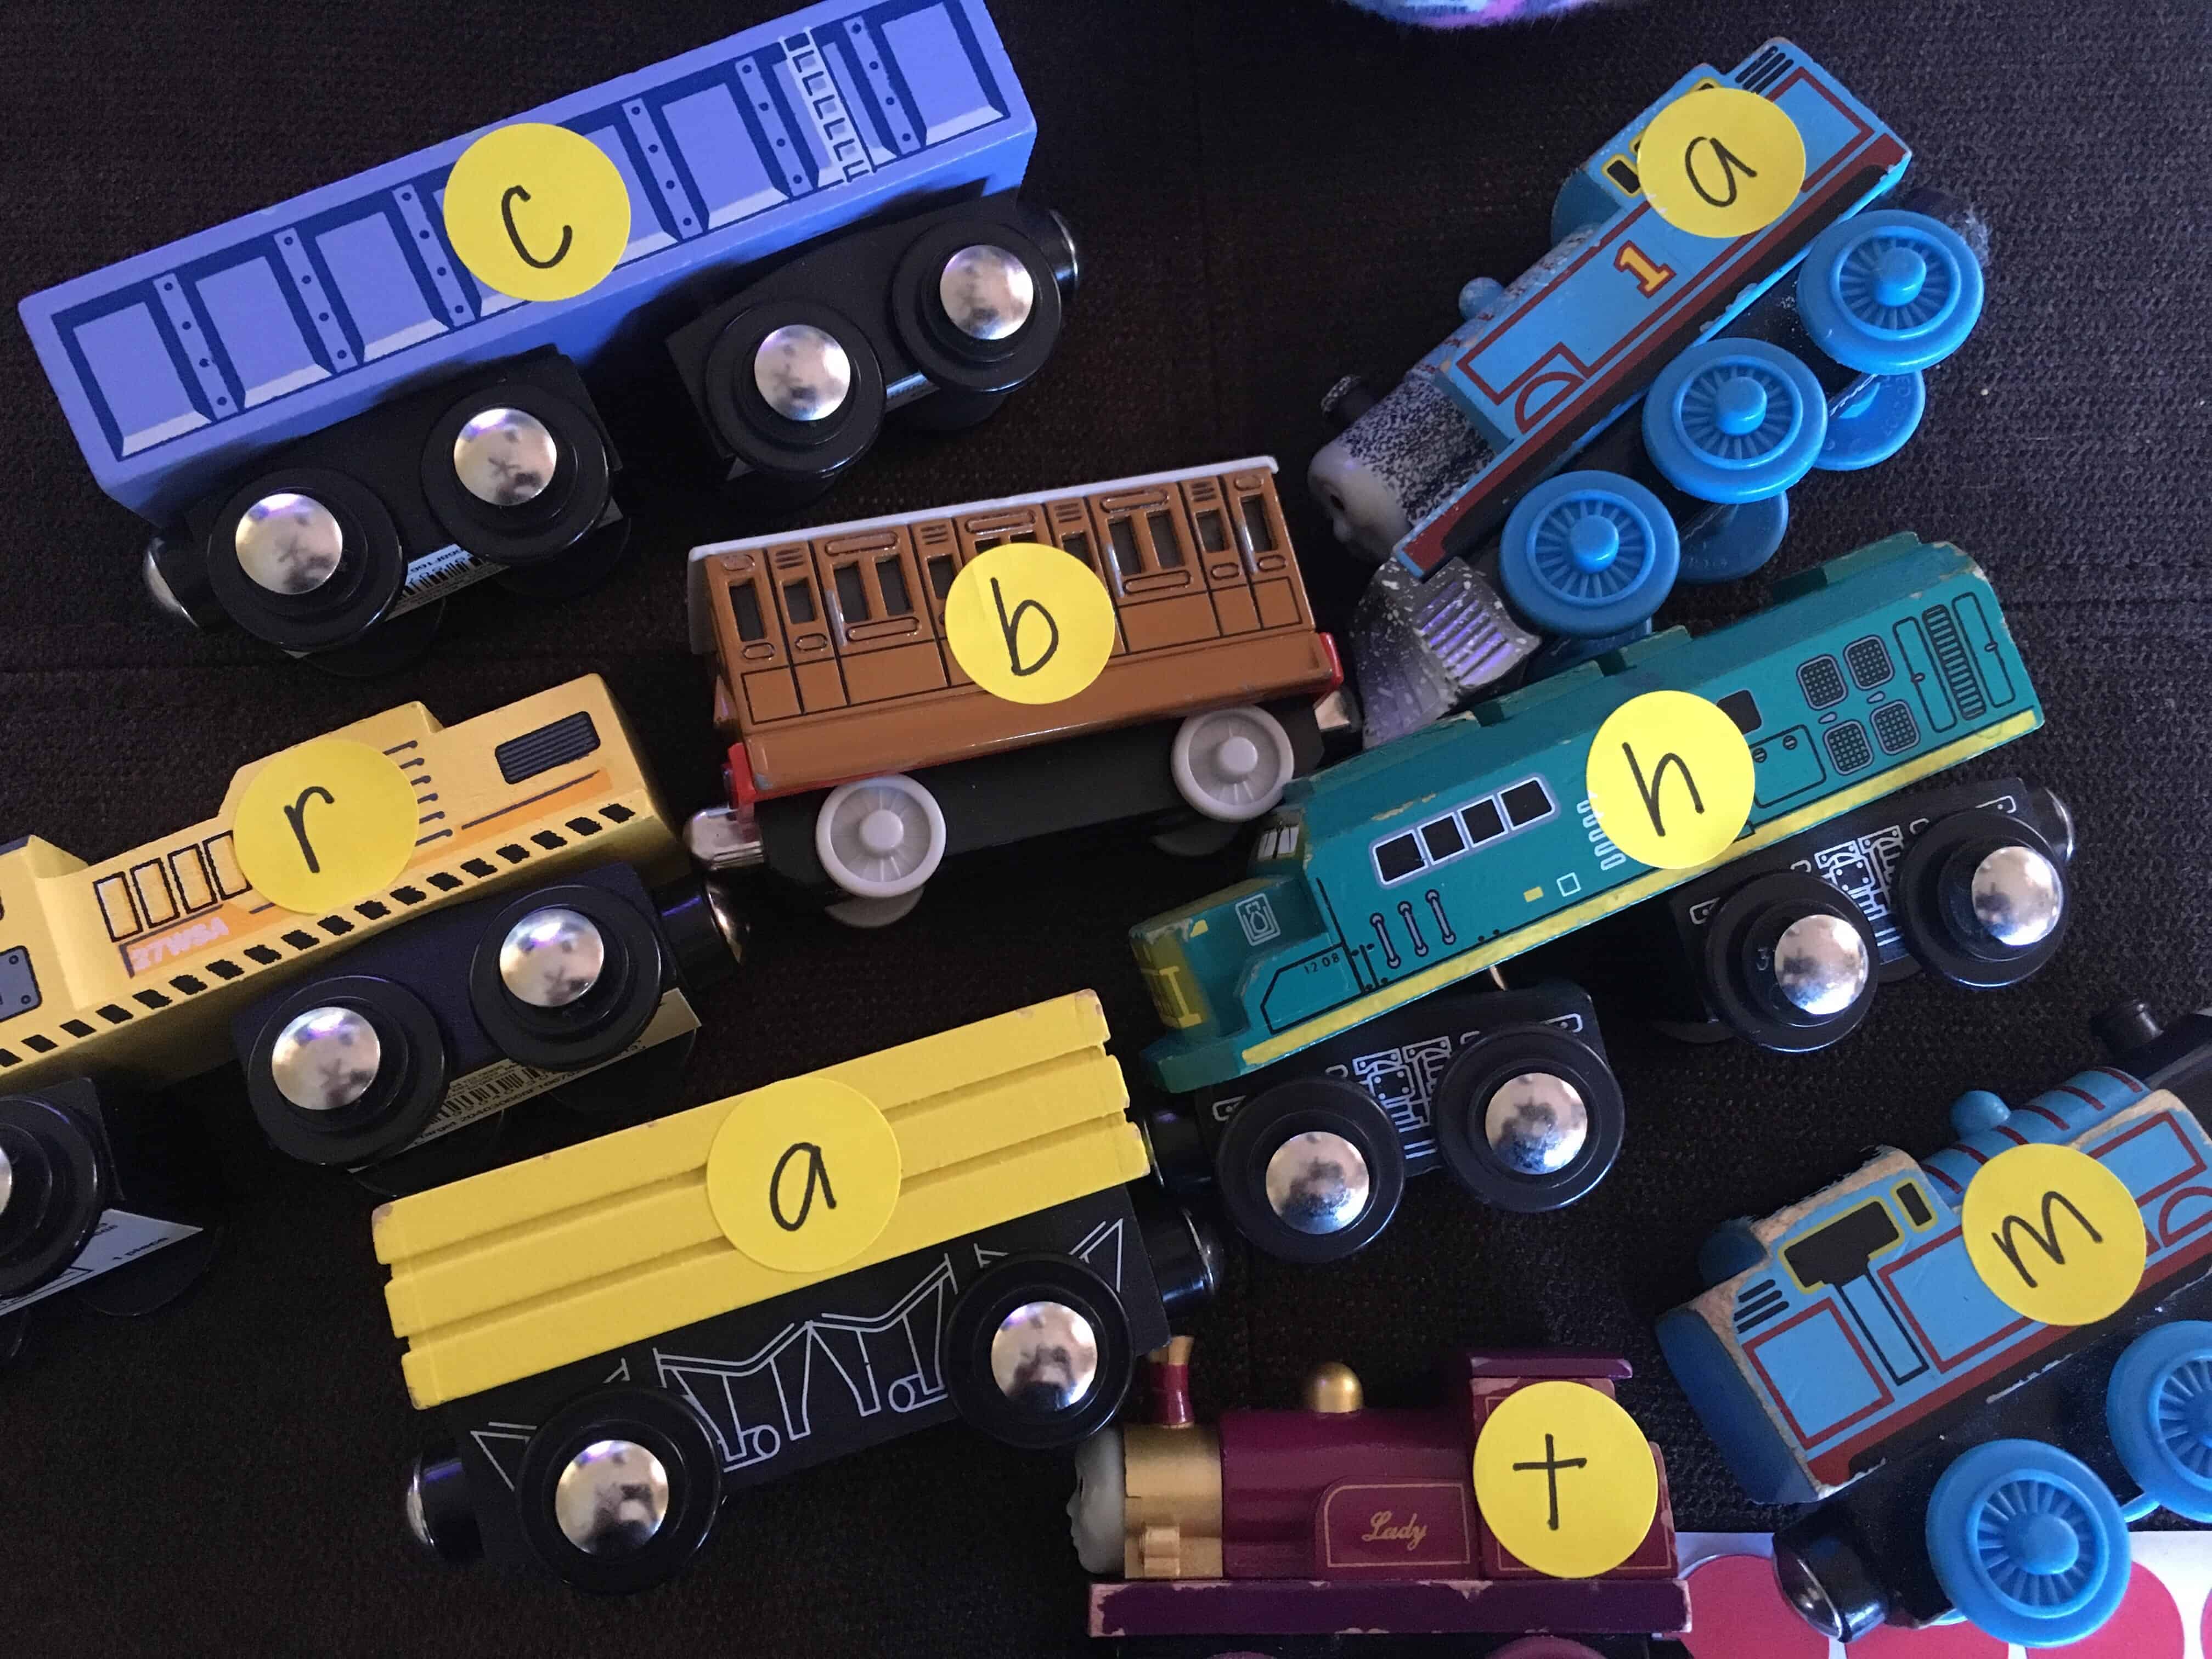 Learn to spell by making literacy fun through play! Use stickers on toy trains to create sight words. 